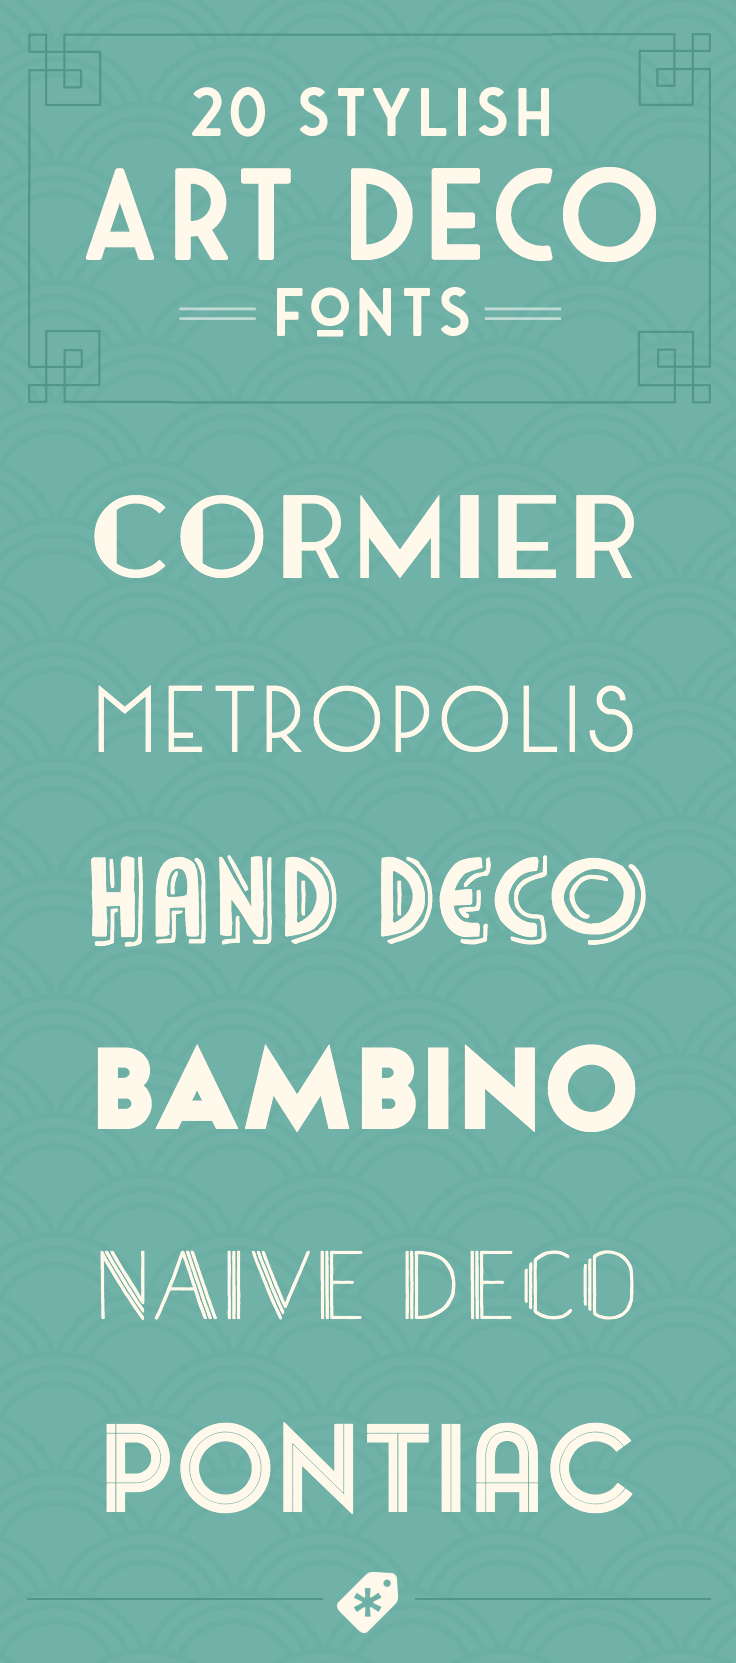 20 Art Deco Fonts to Create Retro Logos, Posters, and Websites ...